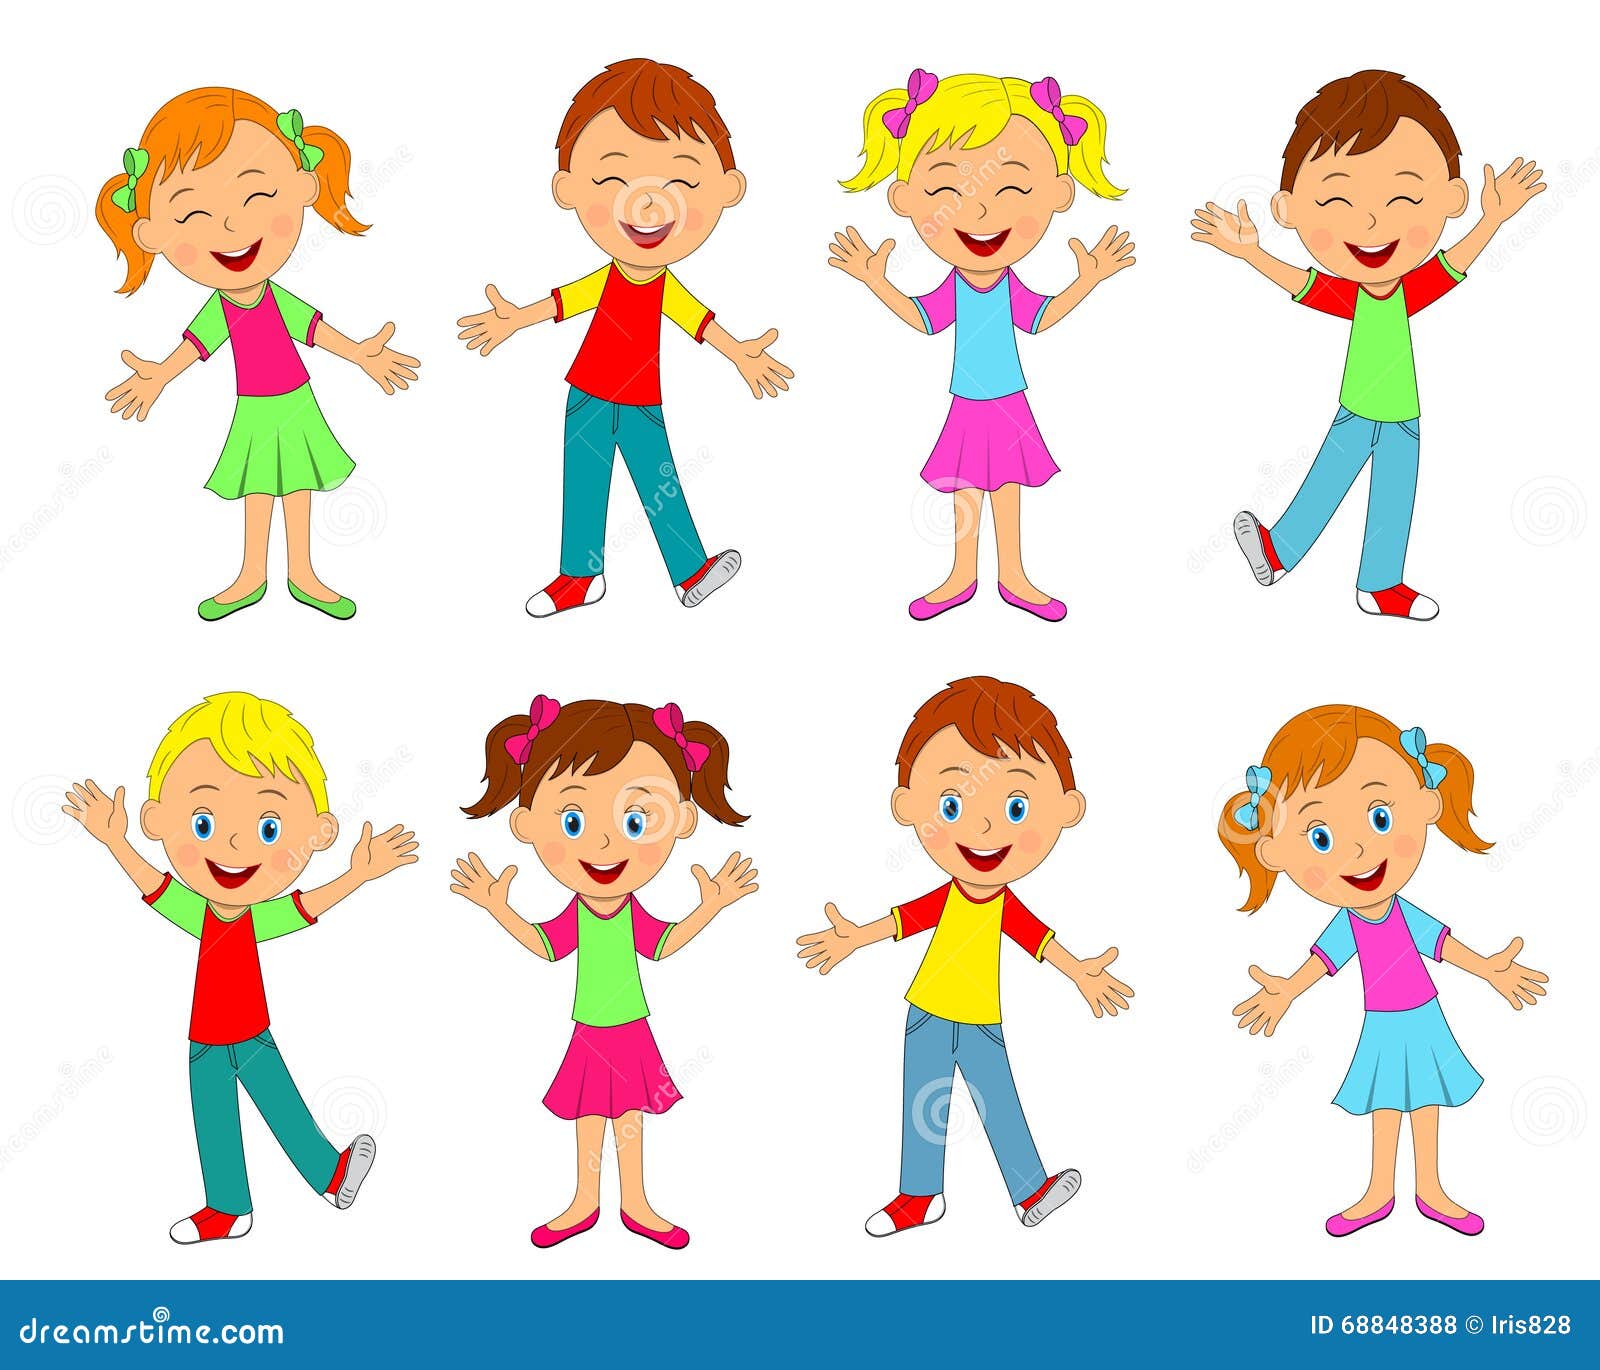 Boys and Girls Smiling Collection Stock Vector - Illustration of eight ...